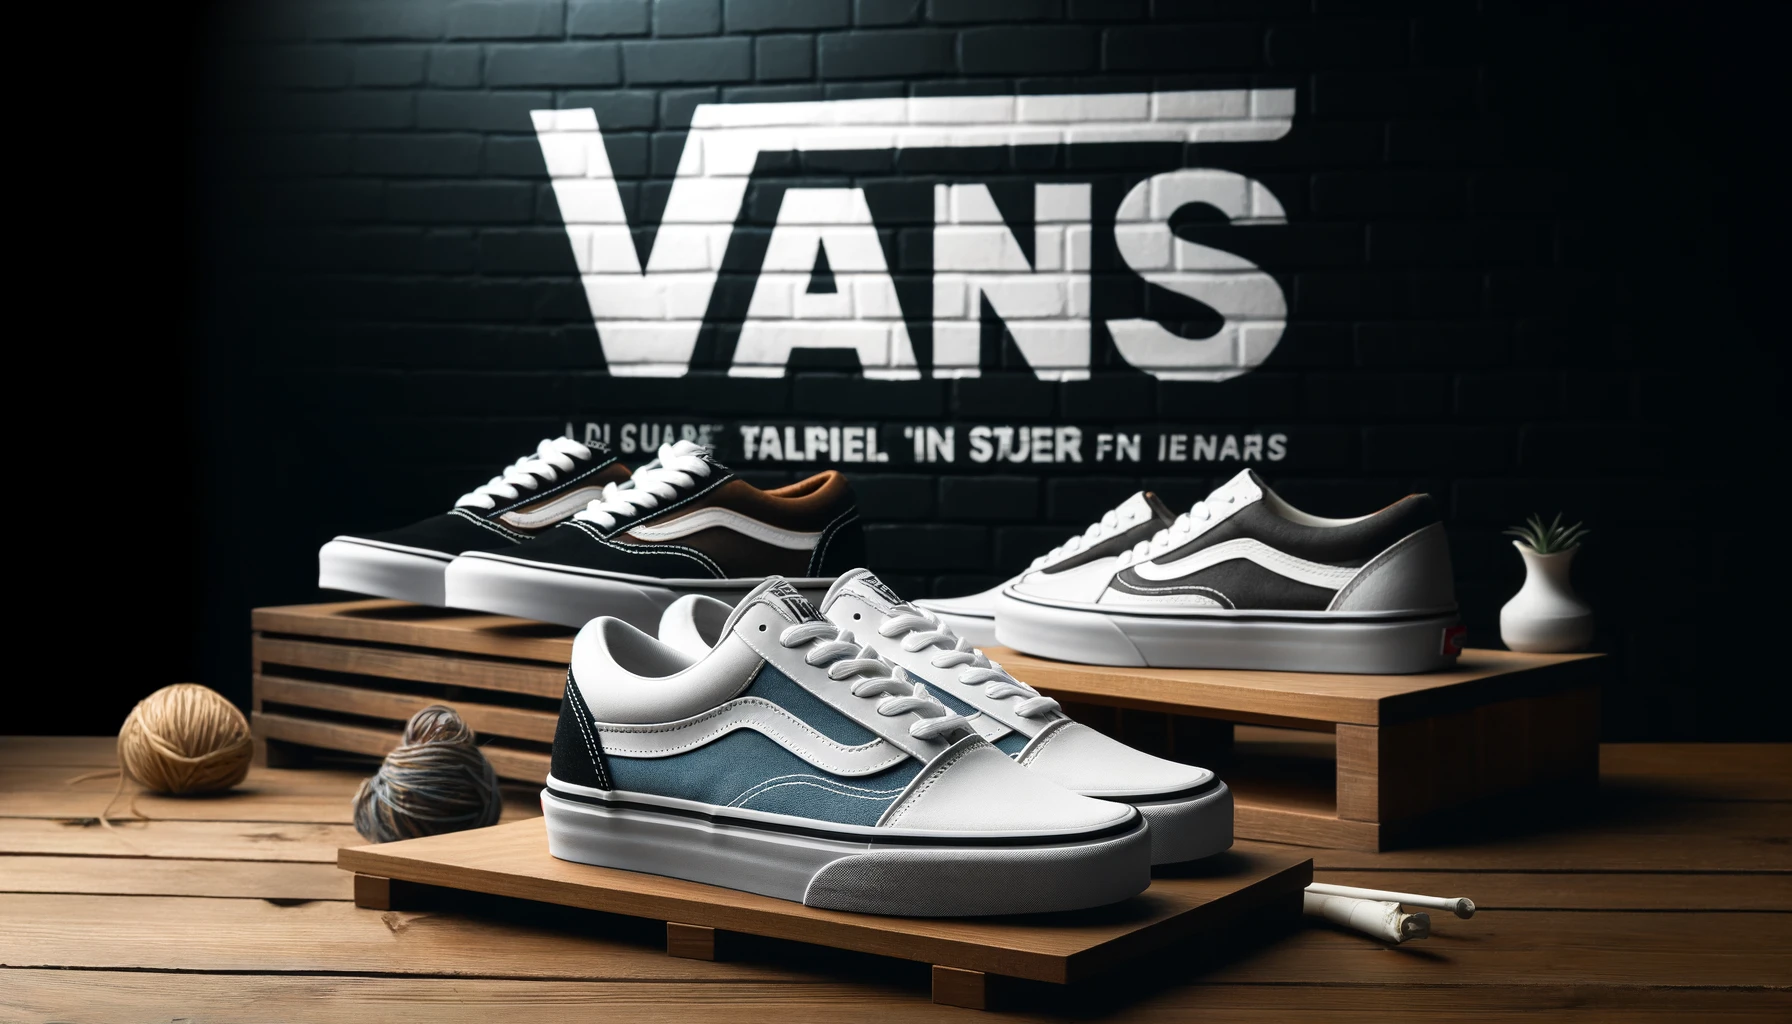 An image showcasing classic VANS sneakers on display with a stylish background, featuring the text 'VANS' prominently.